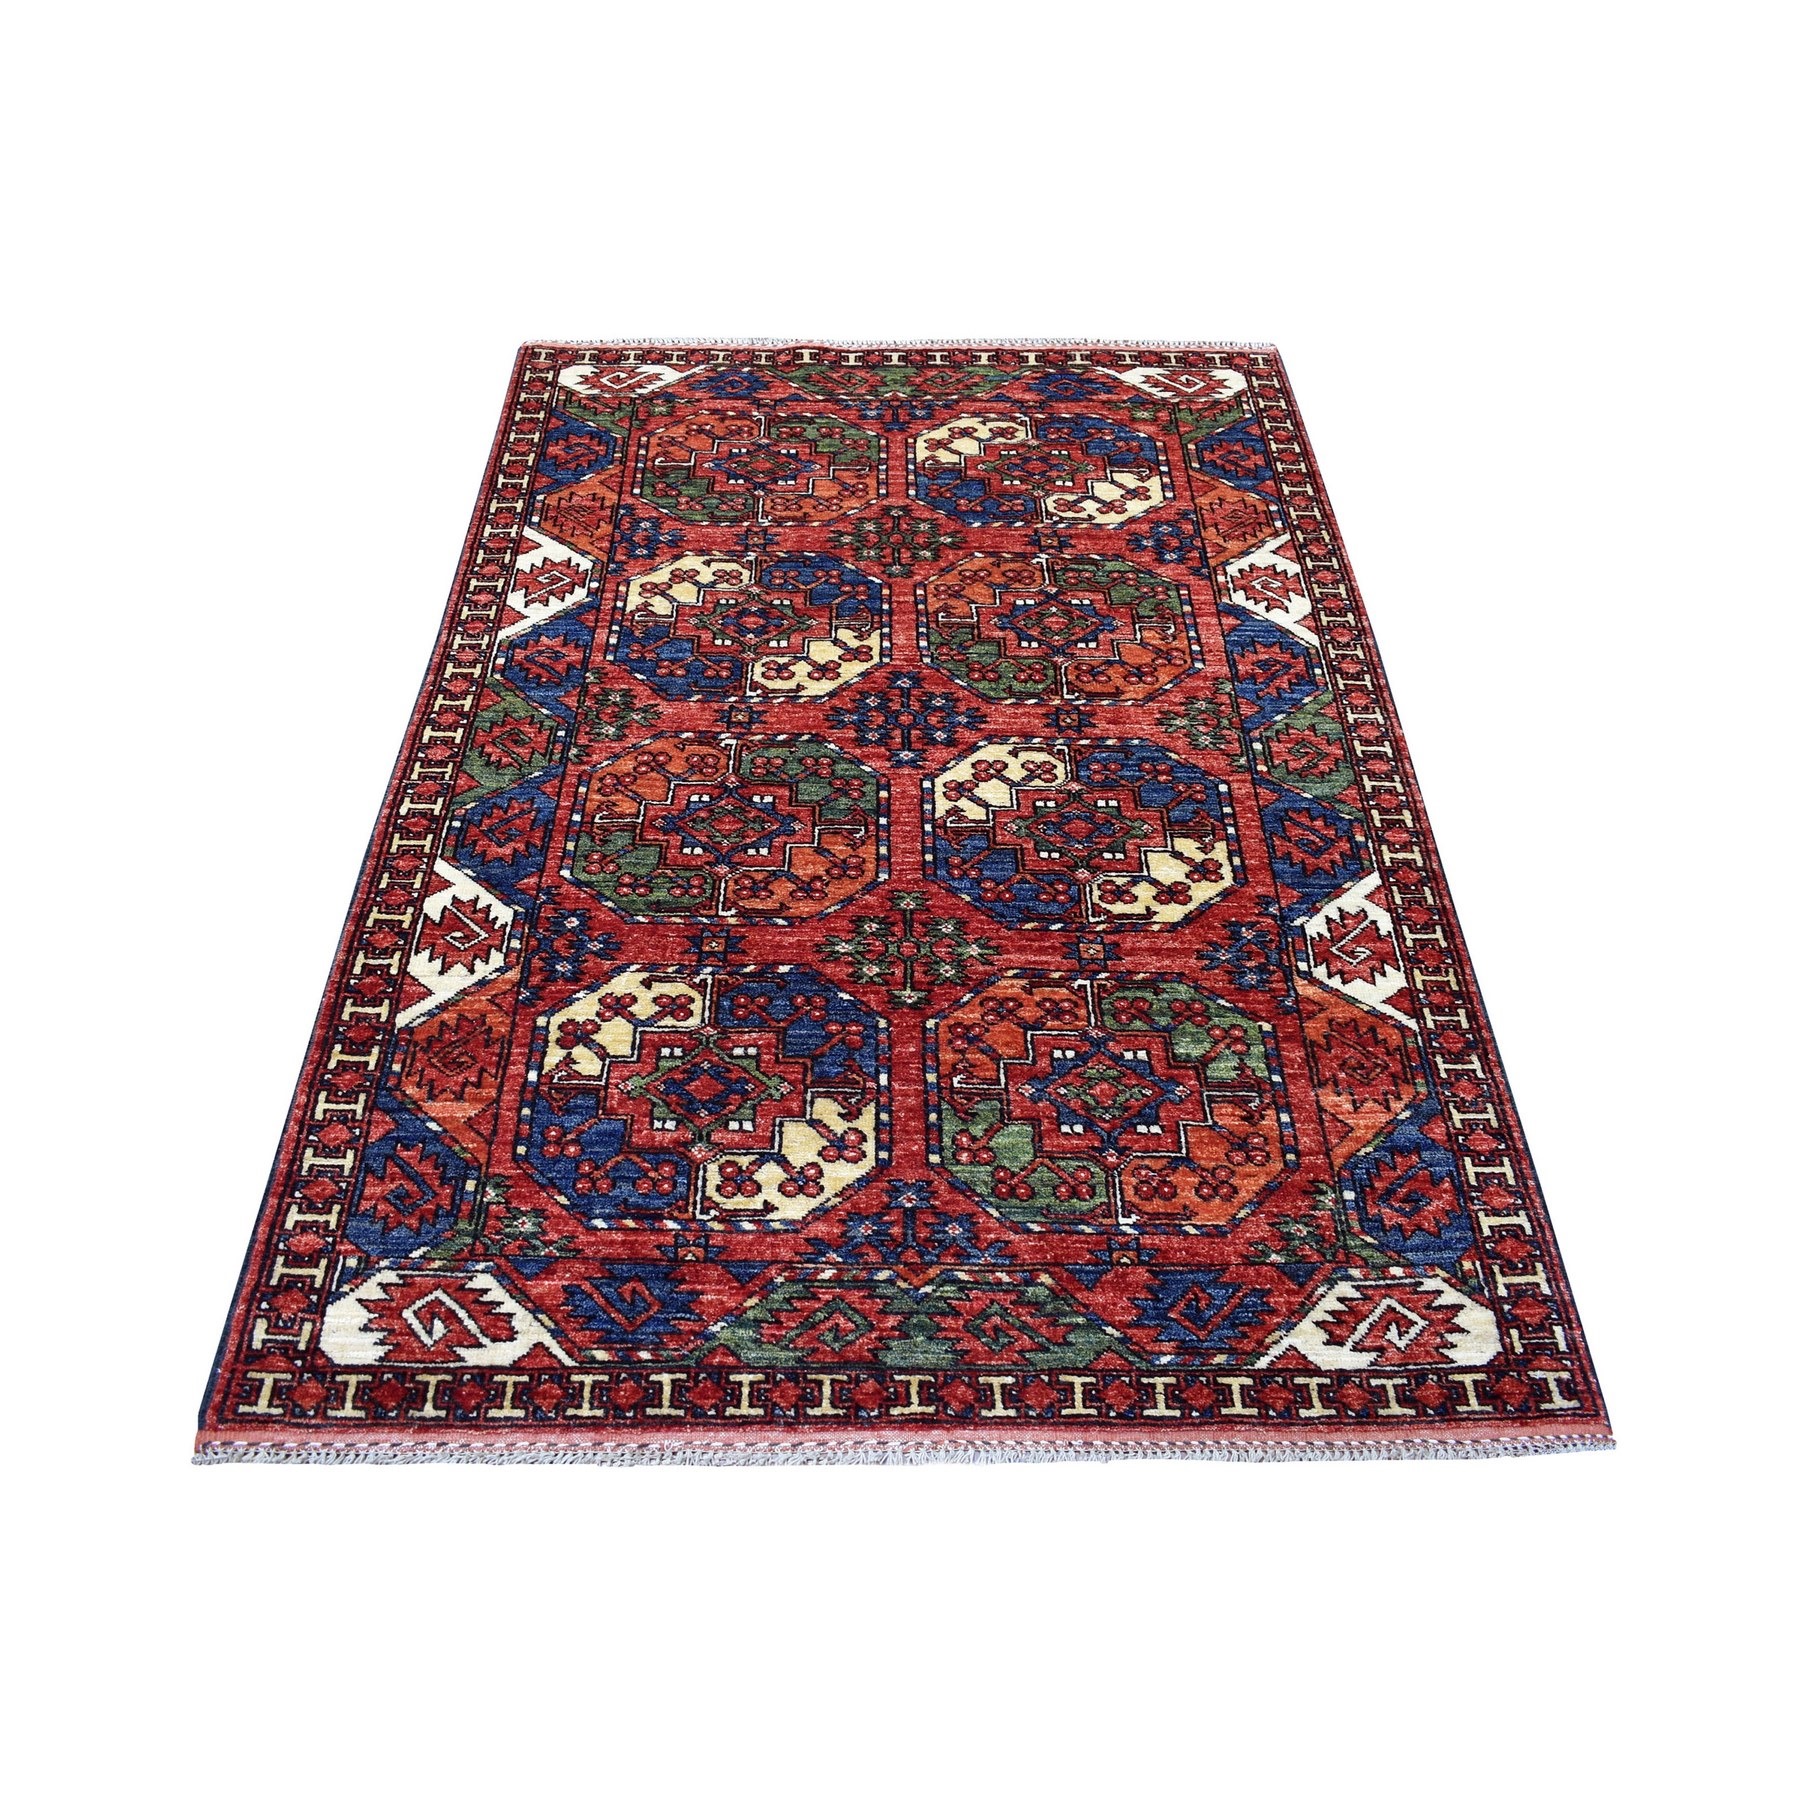 4'x6'1" Red with Soft Colors Elephant Feet Design Hand Woven Pure Wool Afghan Ersari Oriental Rug 